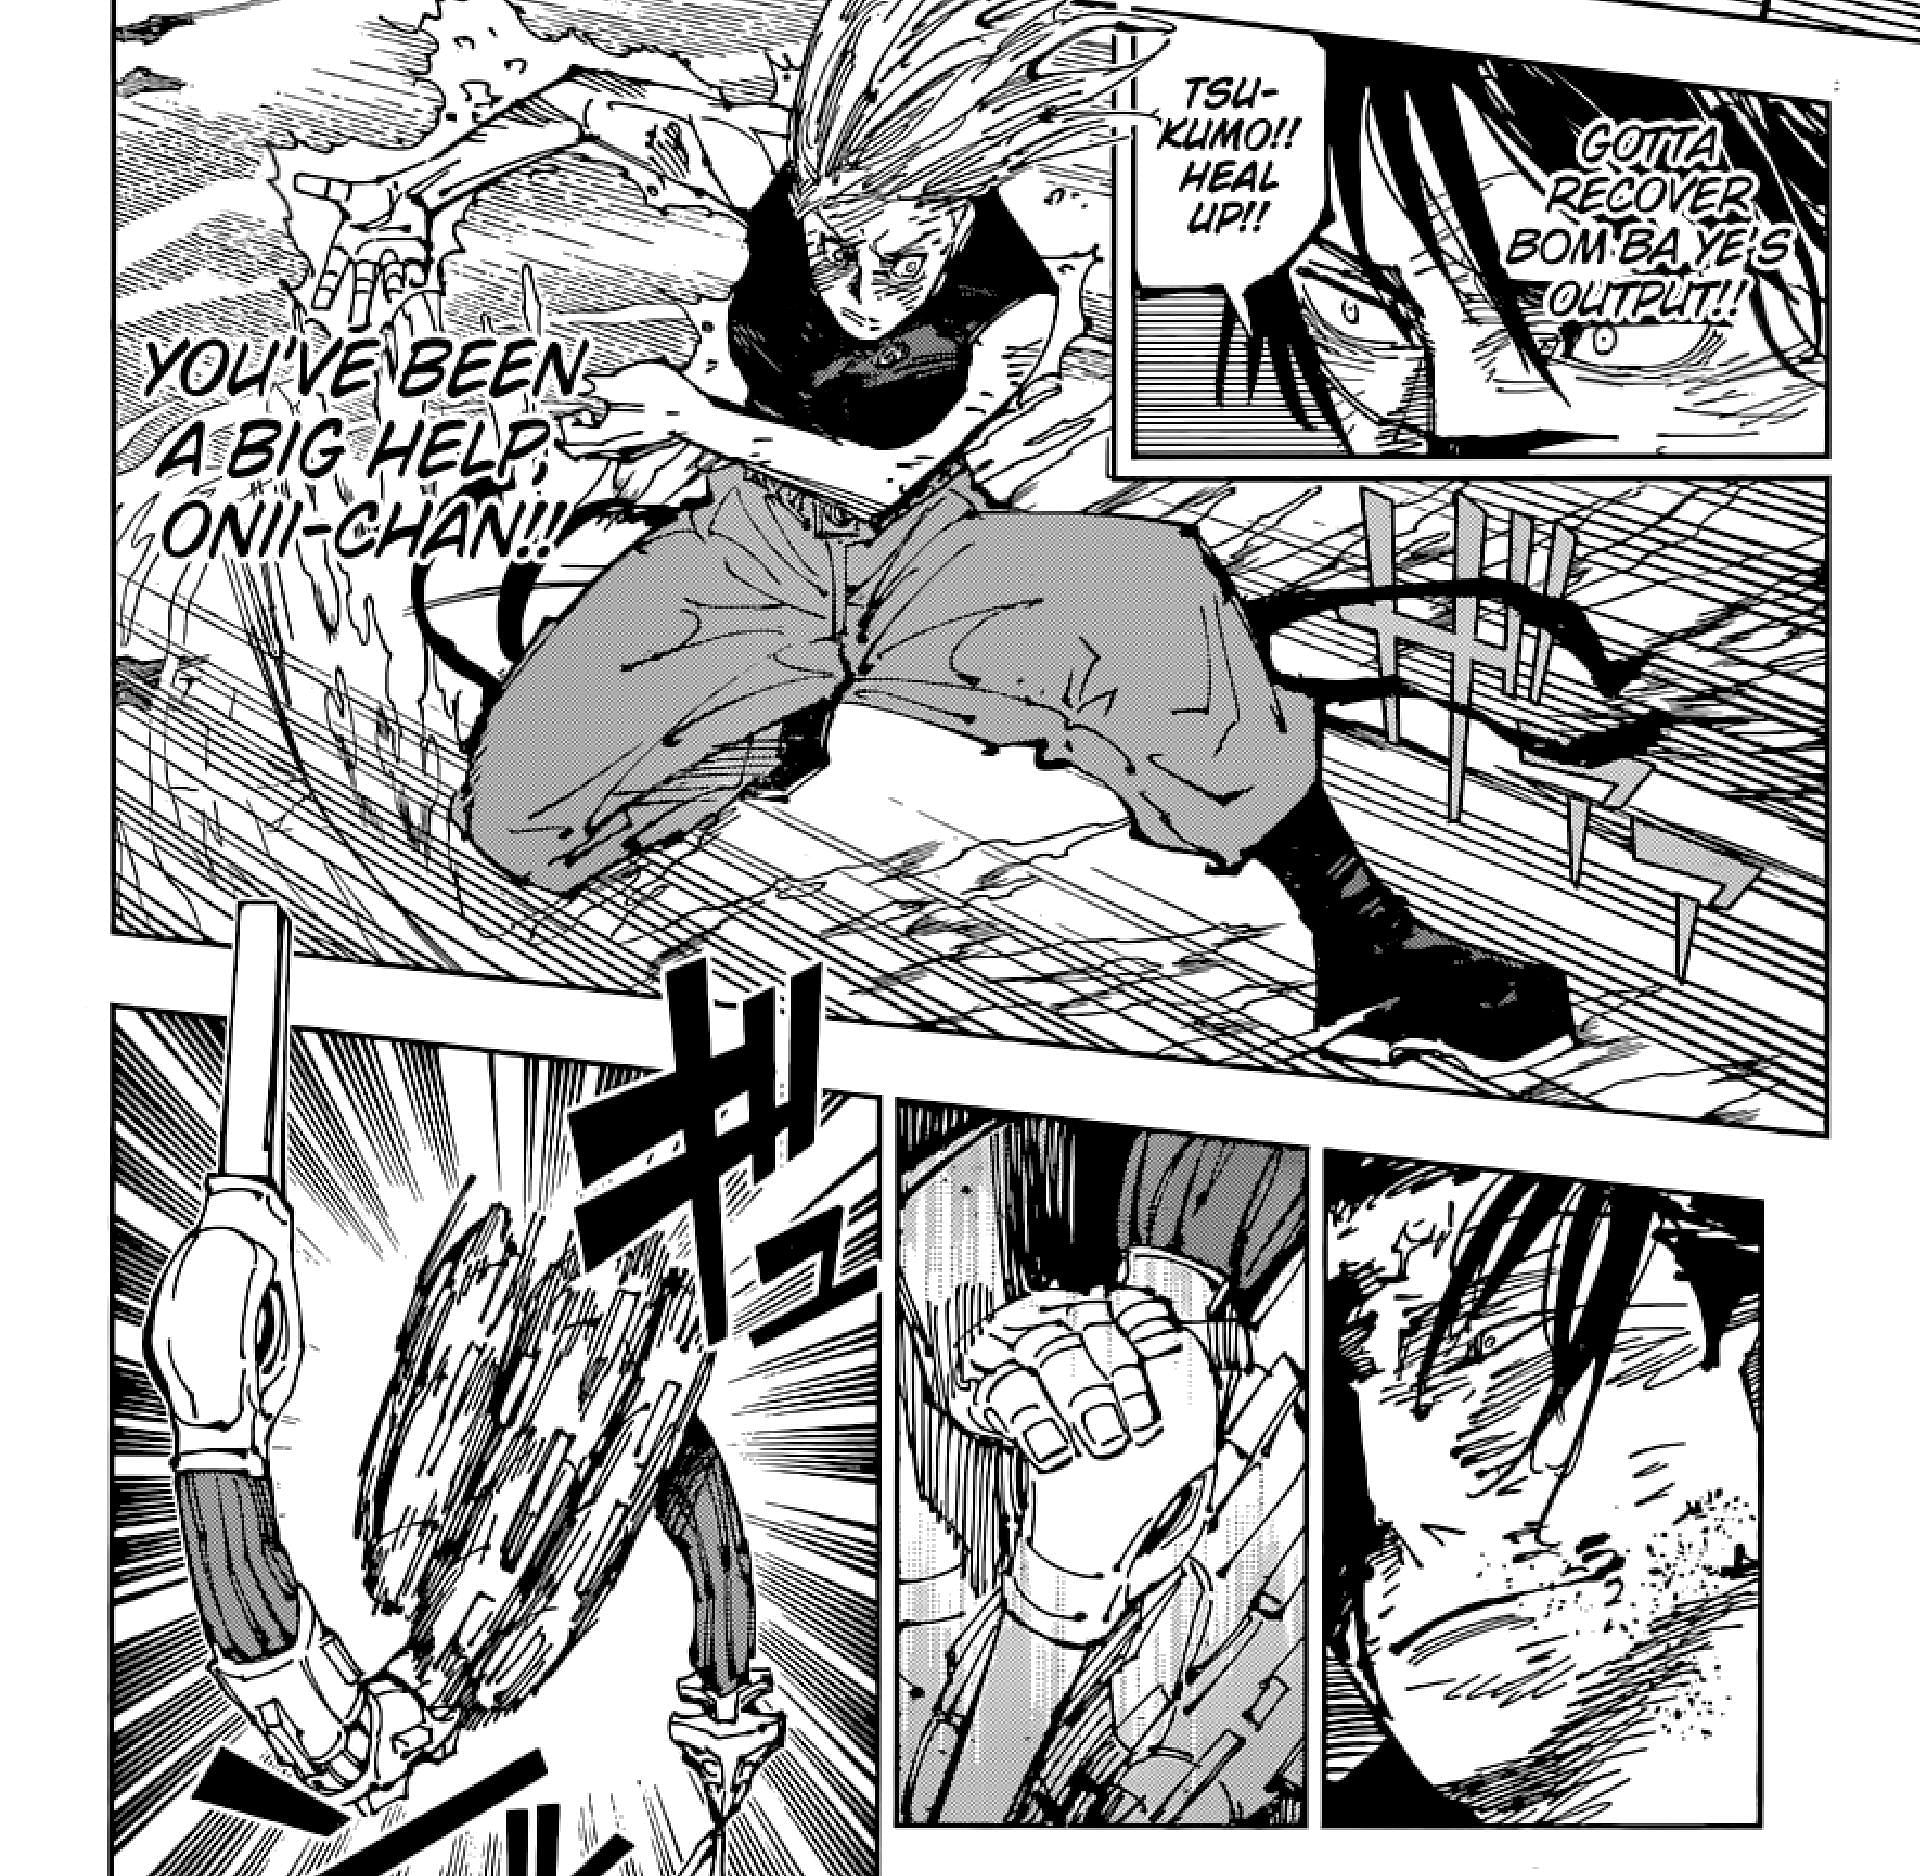 Jujutsu Kaisen Chapter 207 Choso And Yuki Fight Together Kenjaku Turns The Tables On Them 8061